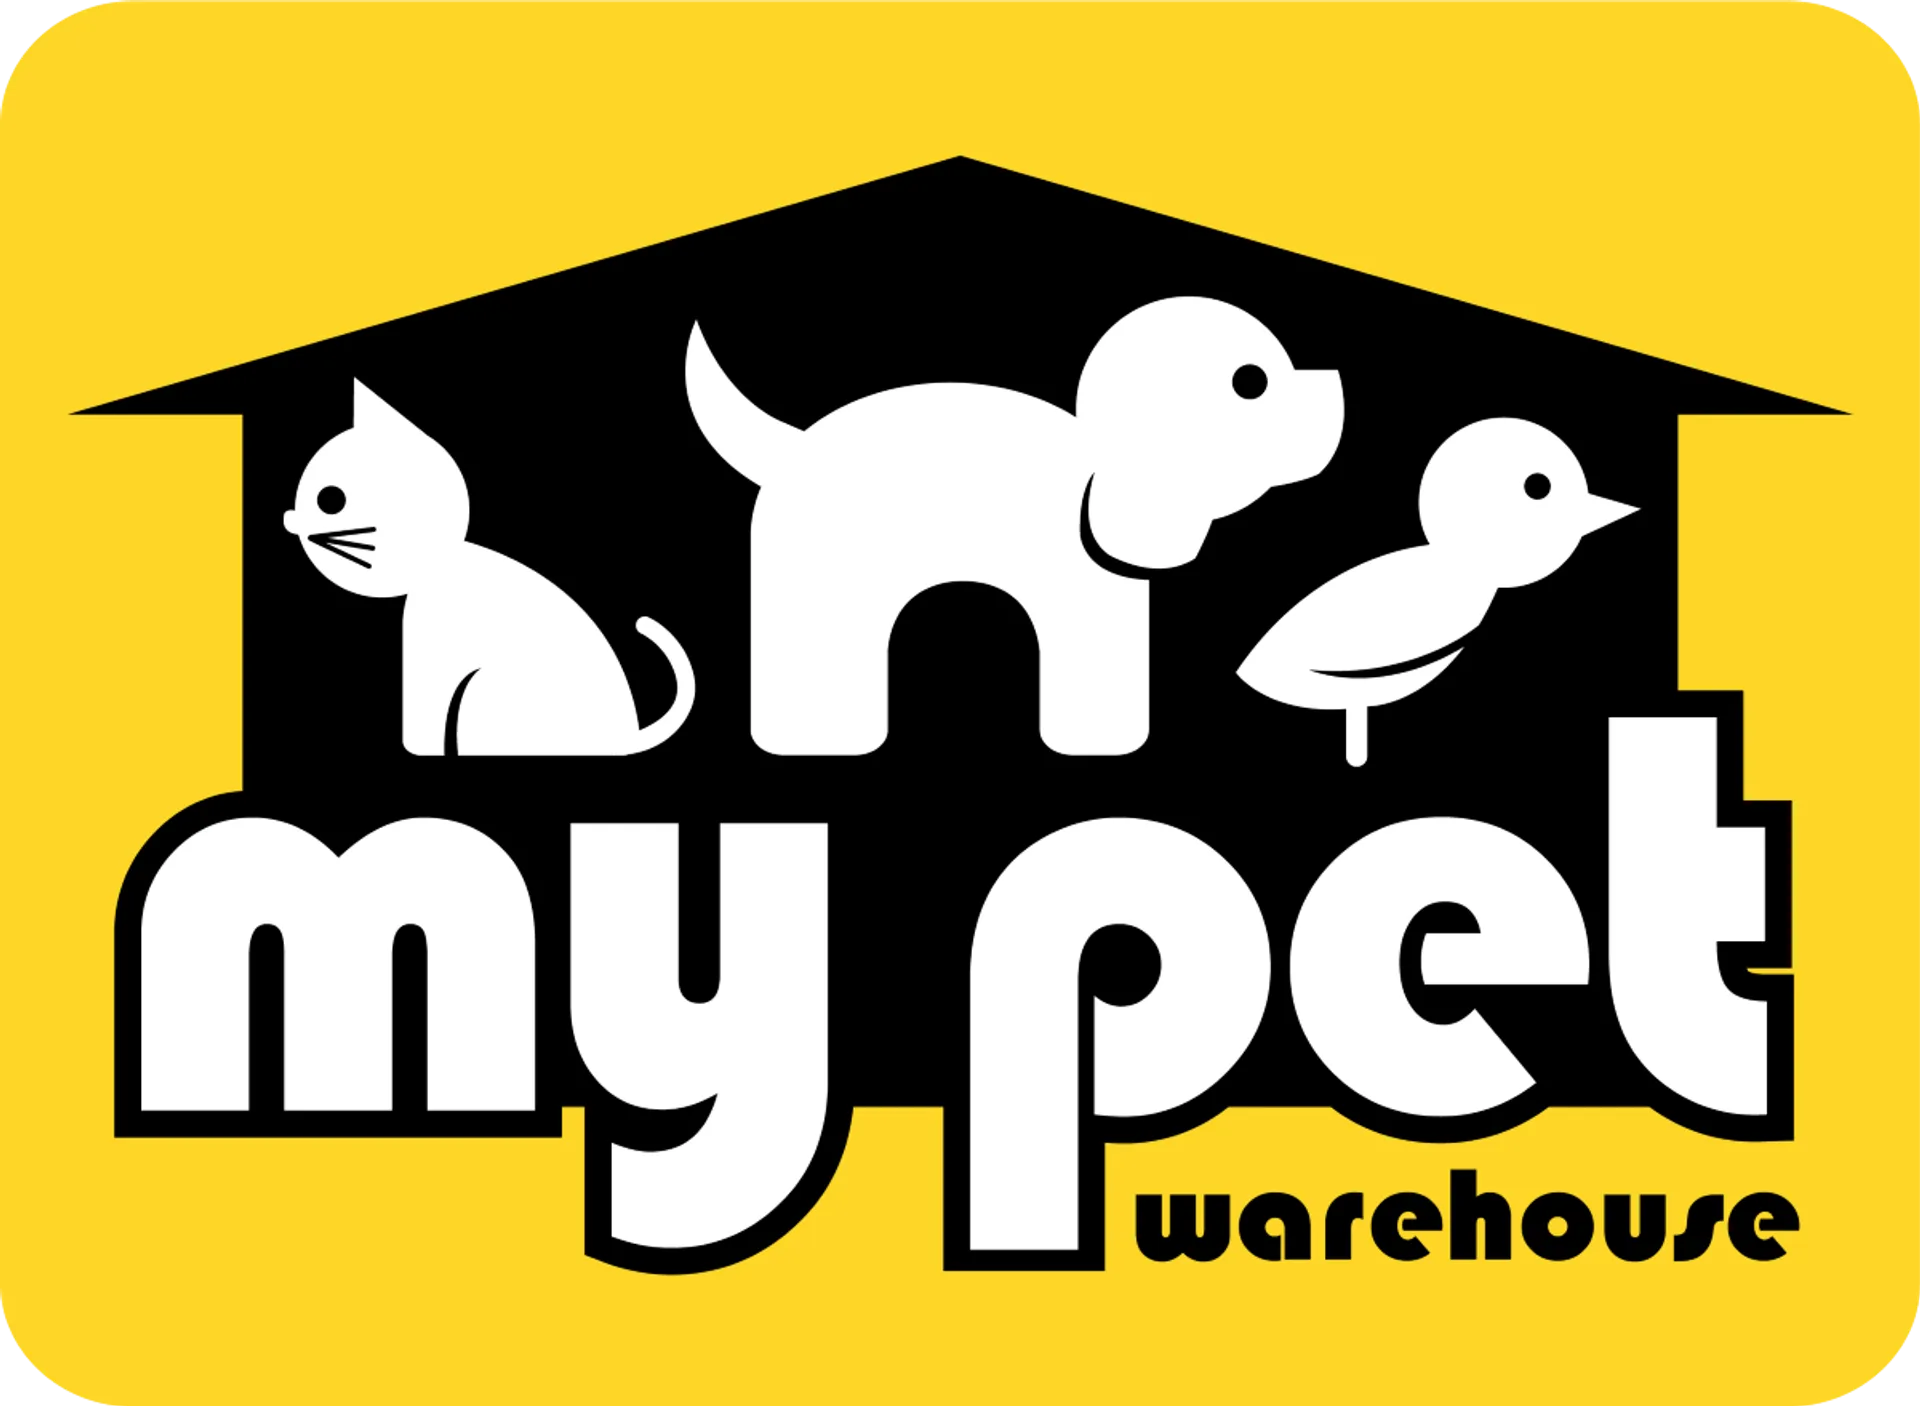 MY PET WAREHOUSE logo of current flyer